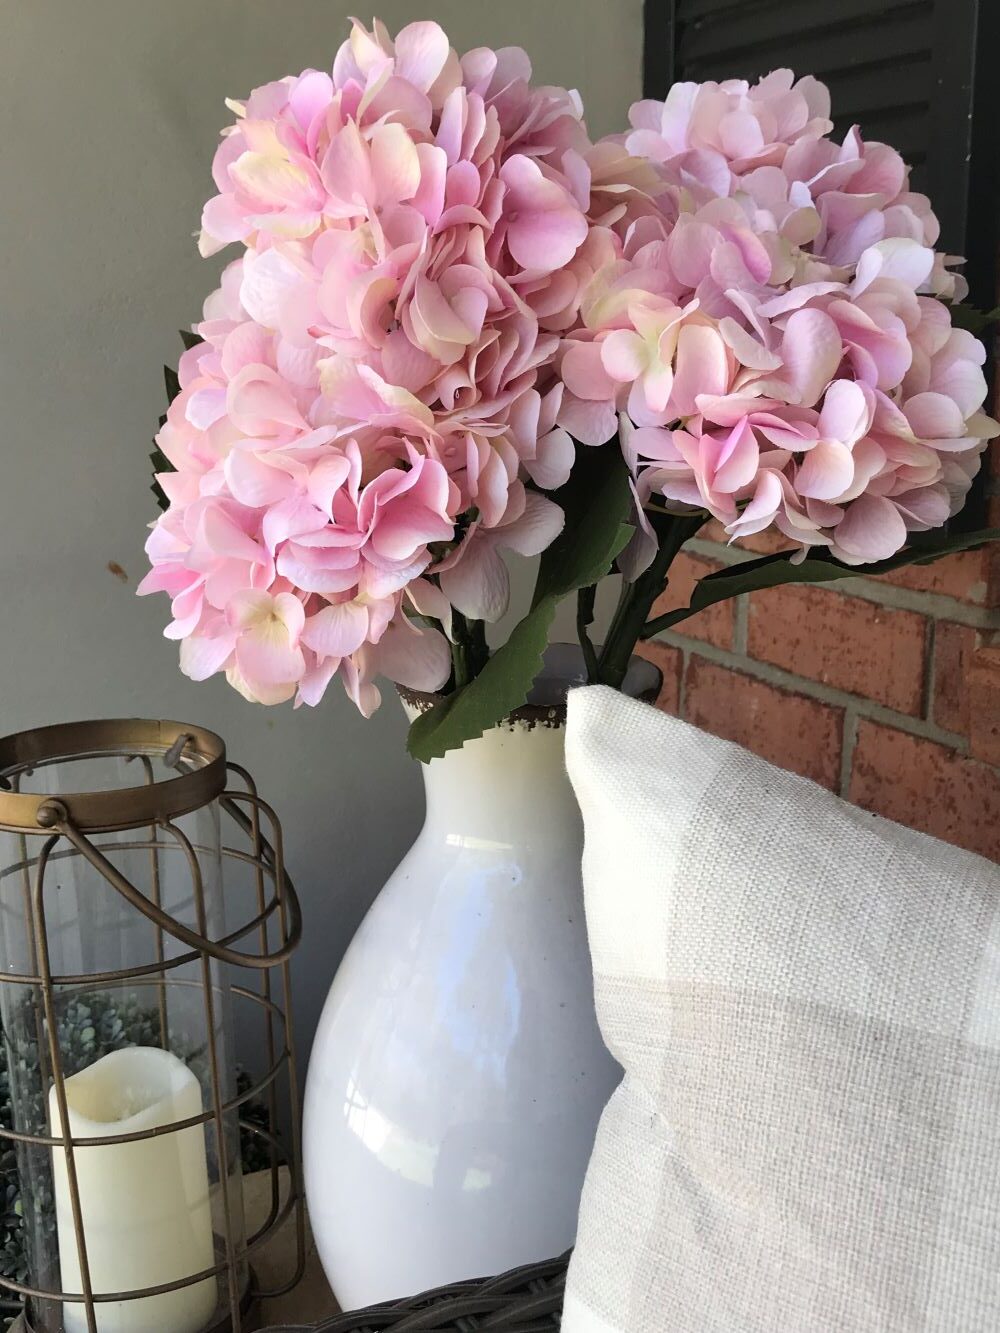 pink faux hydrangeas in white ceramic vase on porch for spring decor from hobby lobby